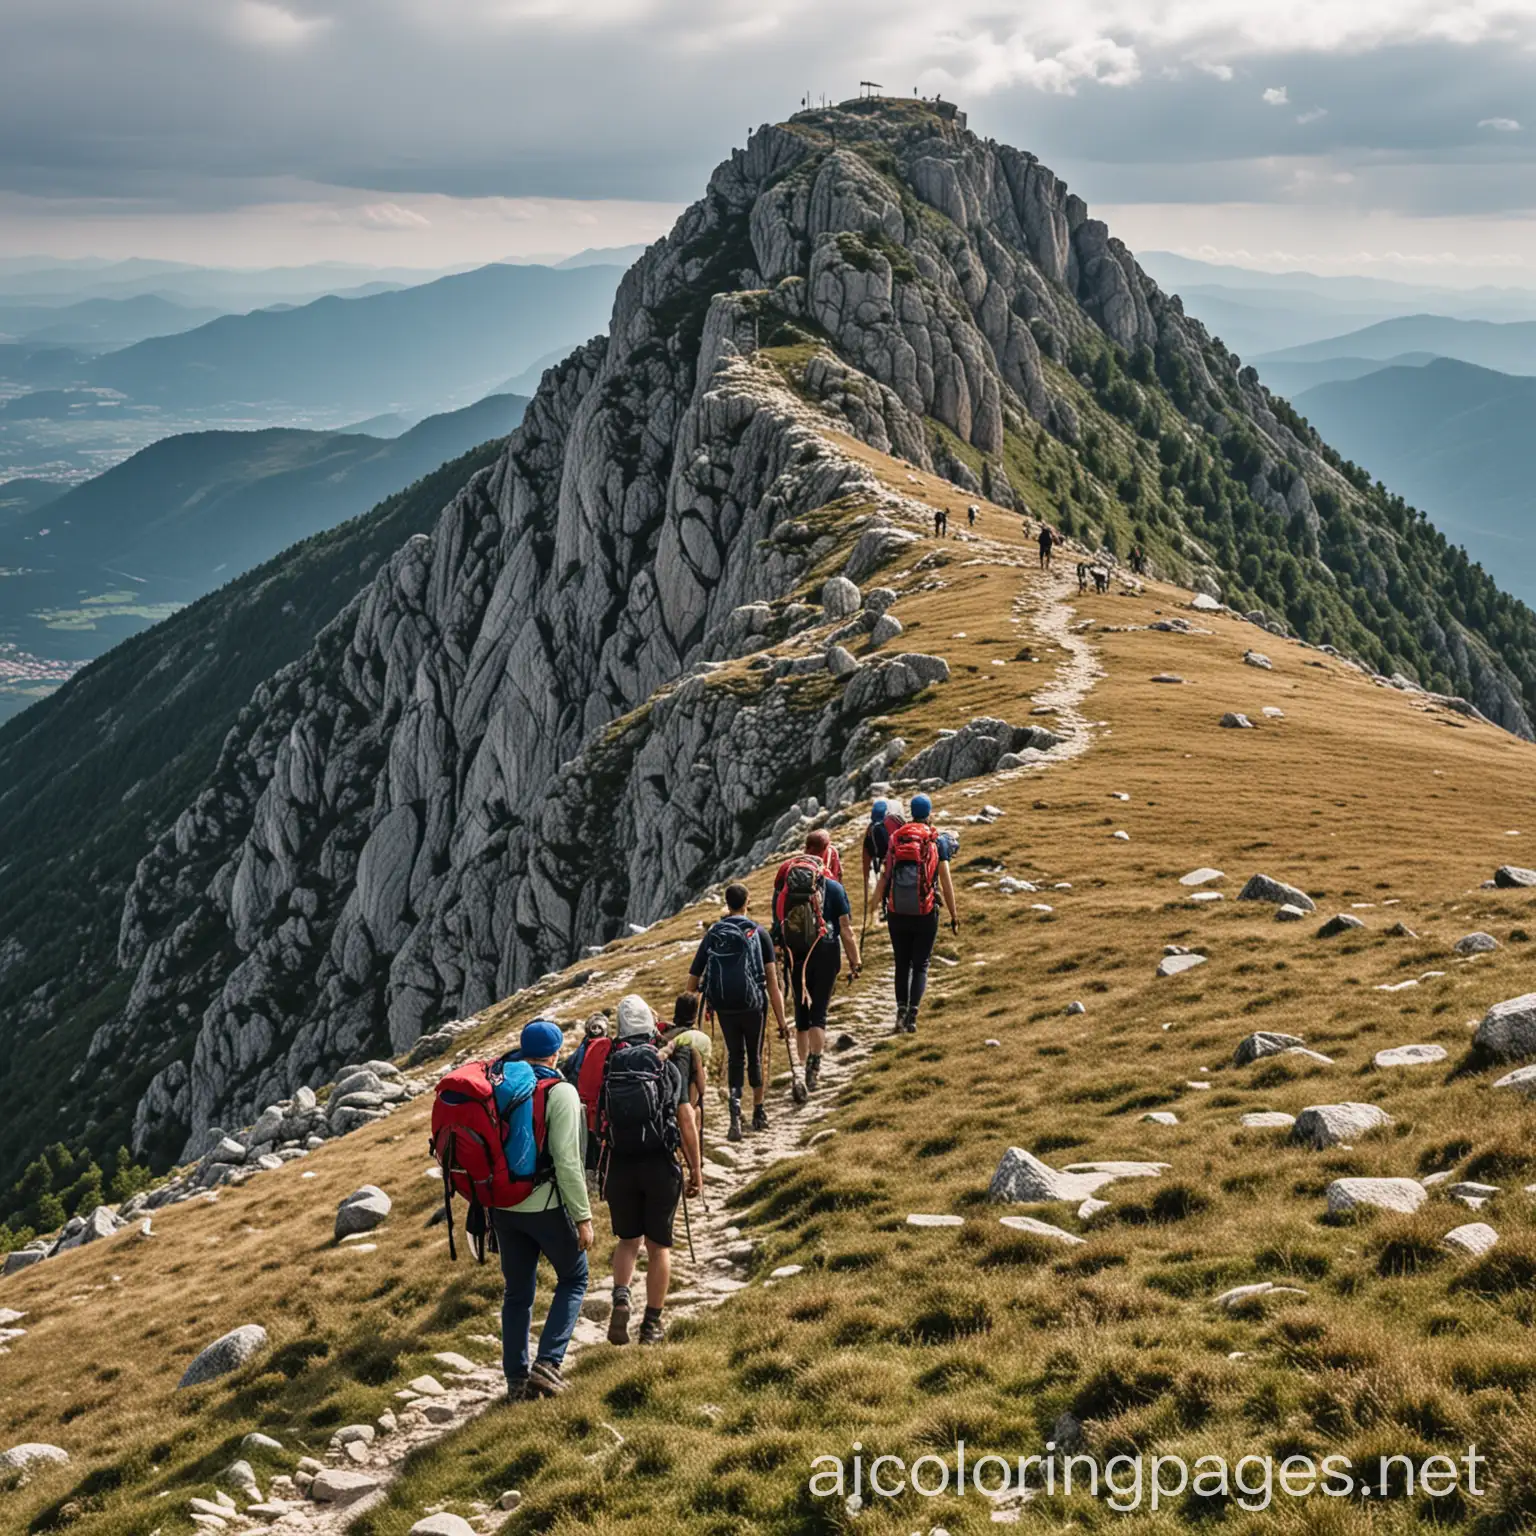 Hikers ascending a mountain top on mount Karadzica in North Macedonia.